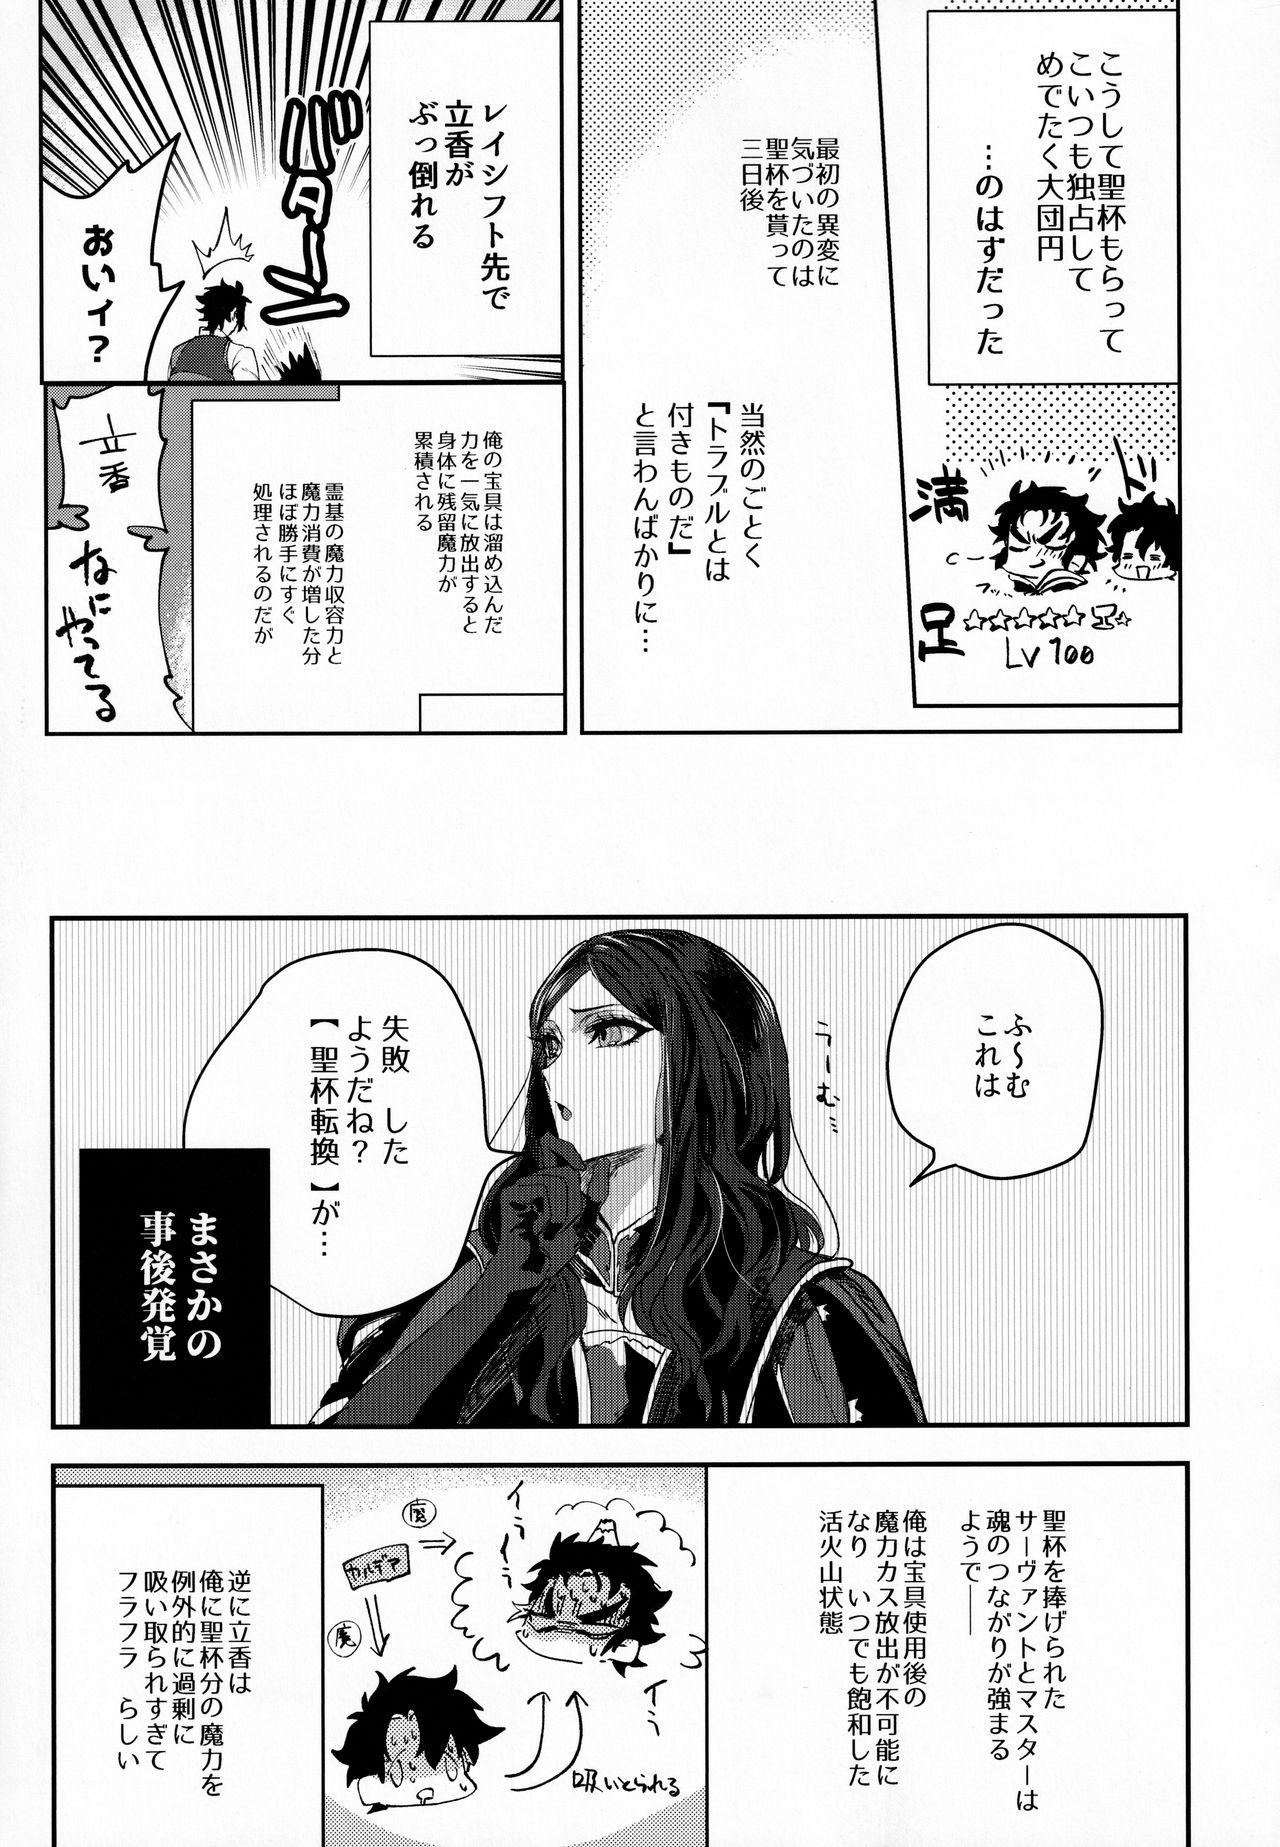 Perfect Teen 耽溺と熱 - Fate grand order Hardcore Rough Sex - Page 12